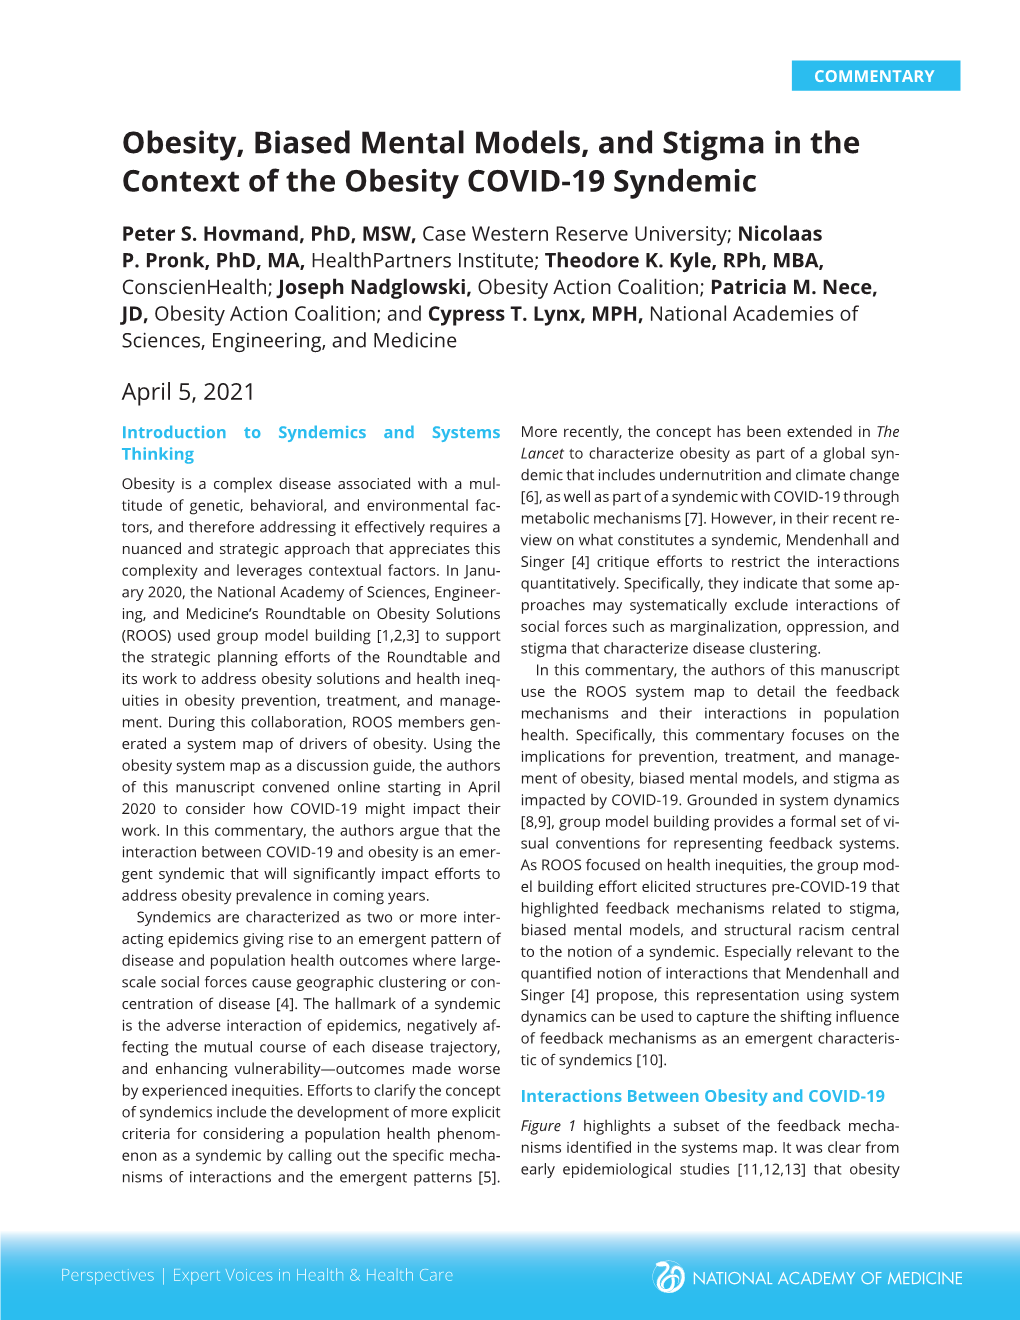 Obesity Biased Mental Models and Stigma COVID19 Syndemic.Indd